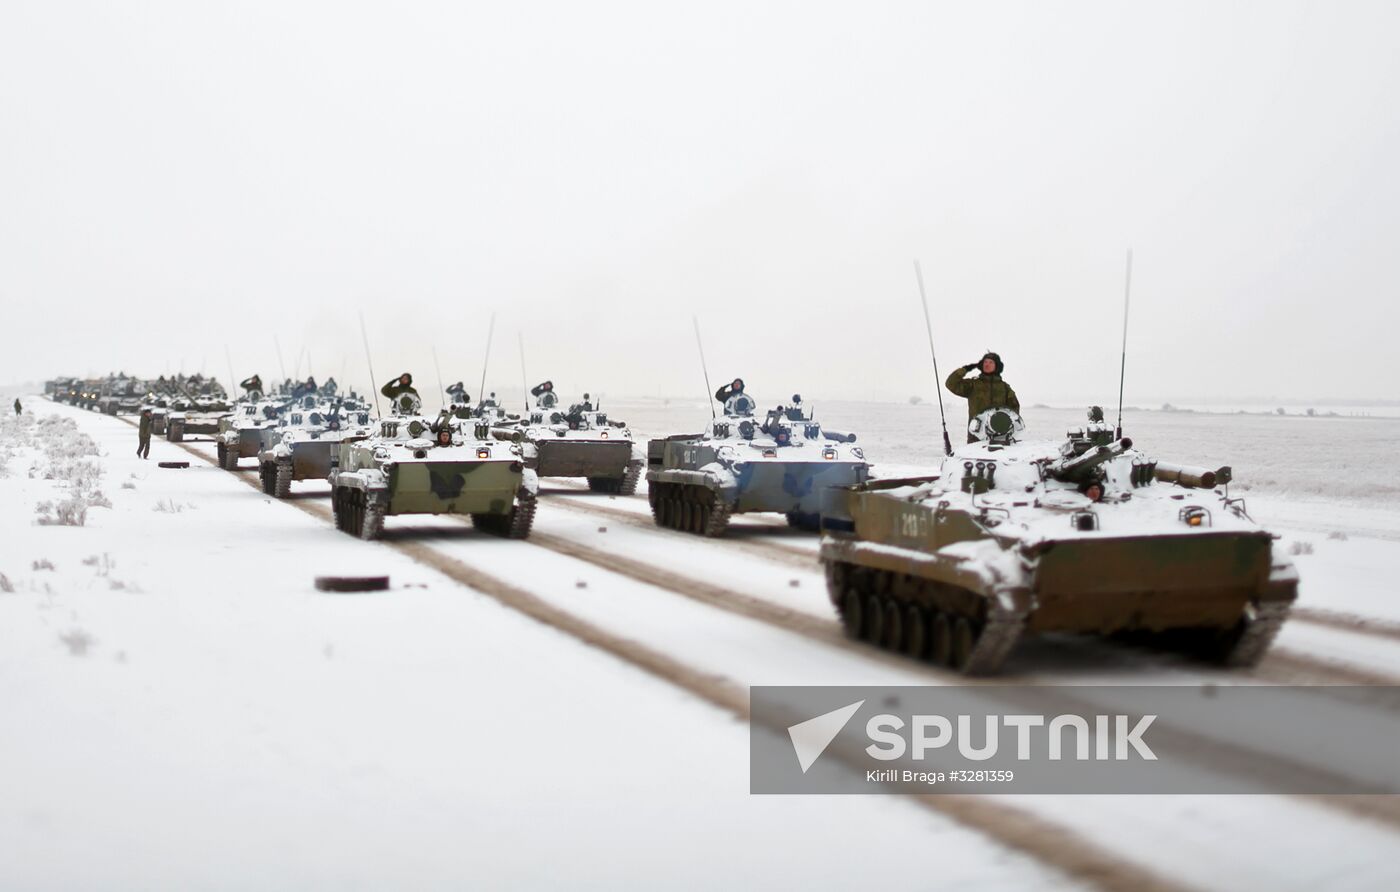 Rehearsal of parade for 75th anniversary of Battle for Stalingrad